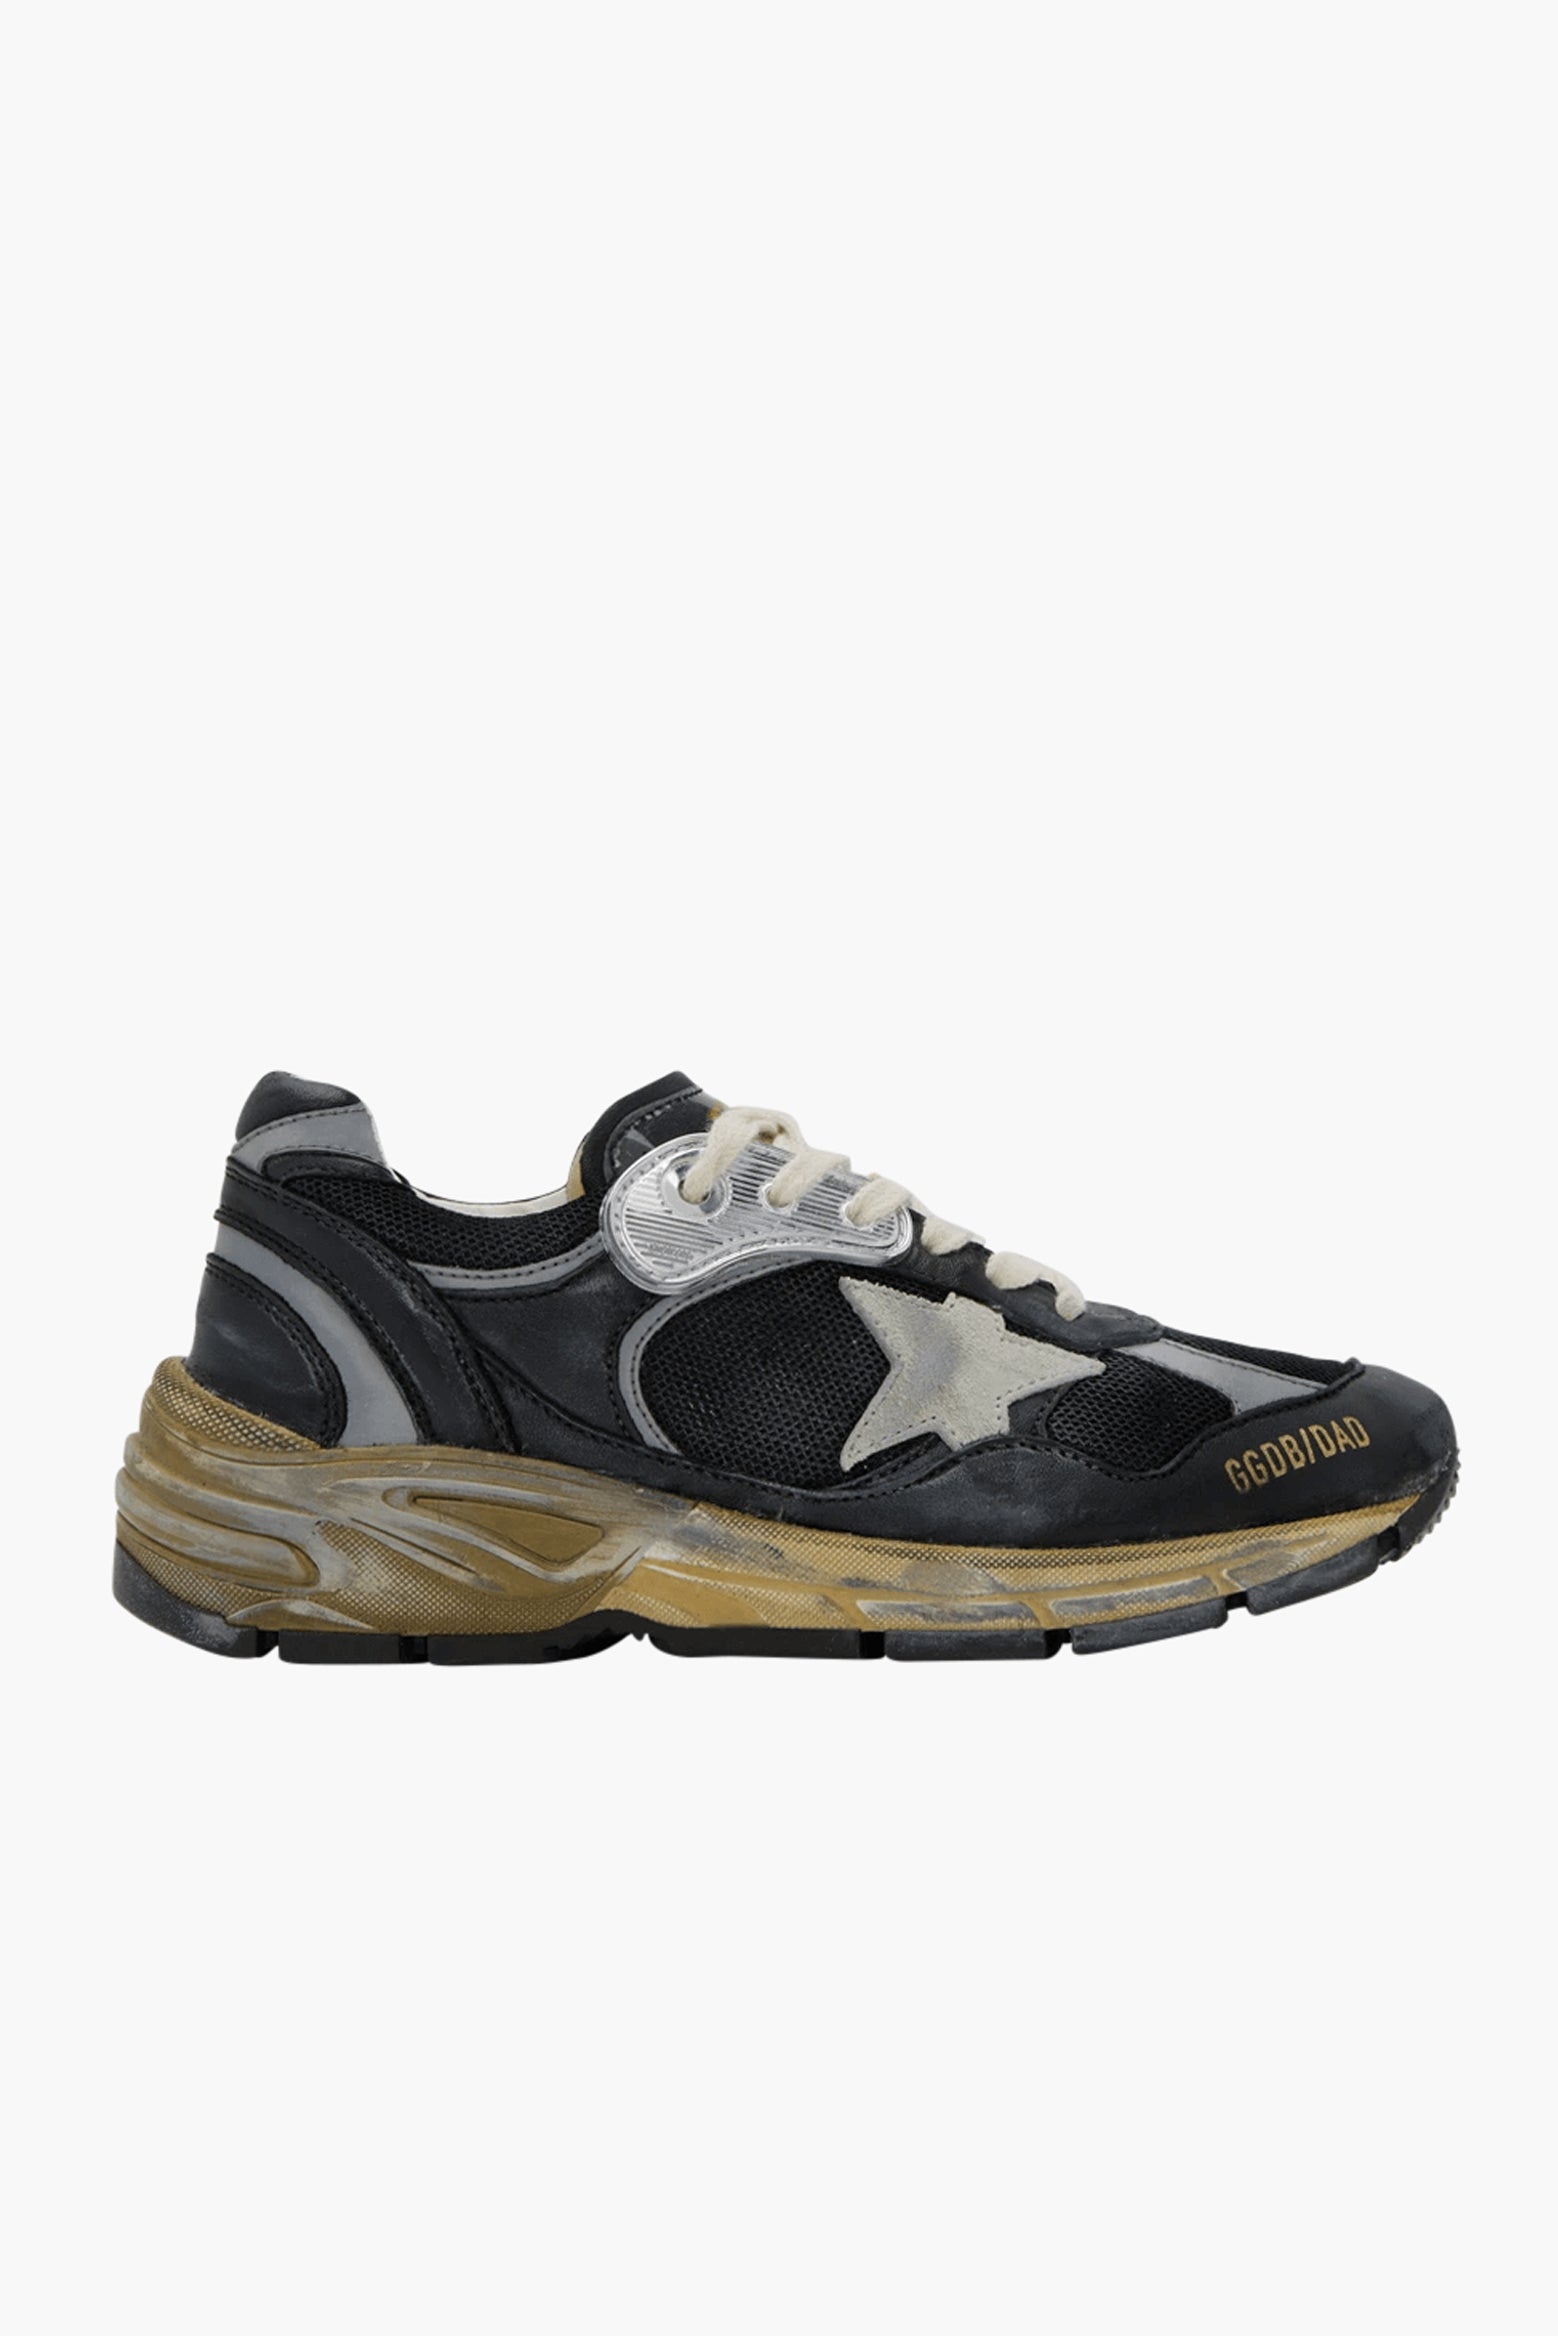 Golden Goose Running Dad Sneaker in Black/Silver/Ice available at TNT The New Trend Australia.